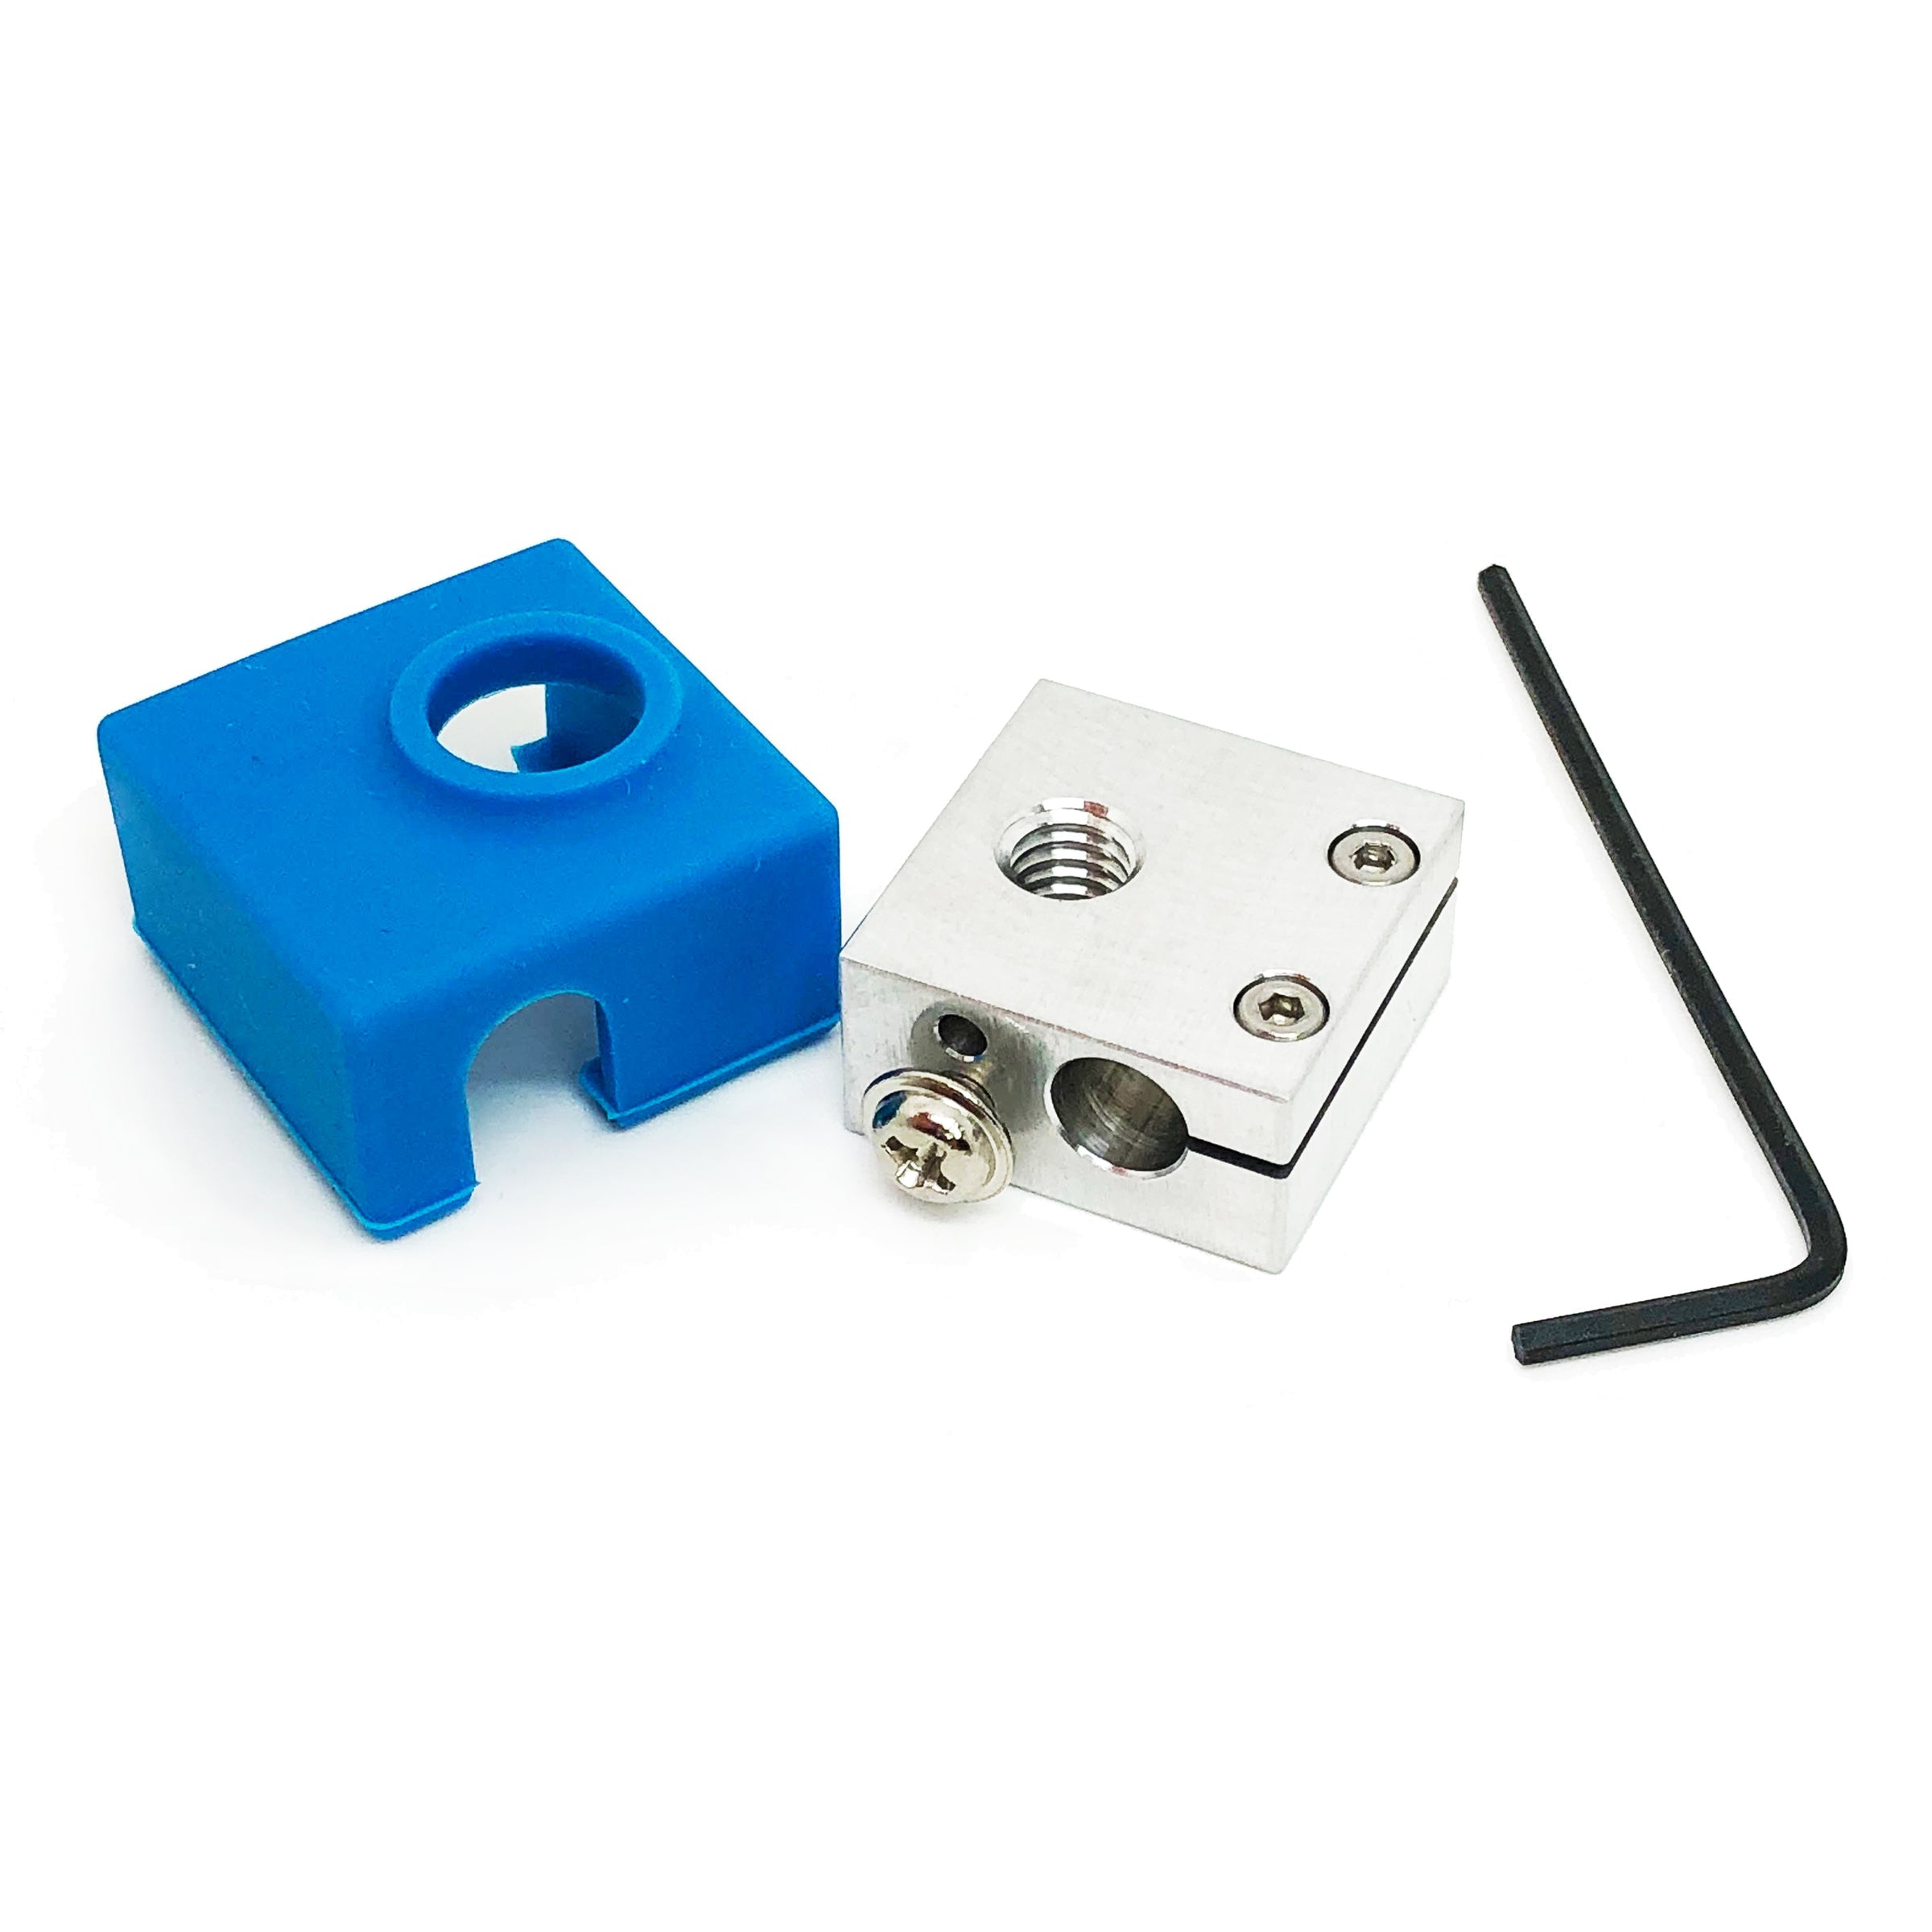 Micro Swiss Heater Block Upgrade with Silicone Sock for CR10 / Ender 2 / Ender 3 / ANET A8 Printers MK7, MK8, MK9 Hotends